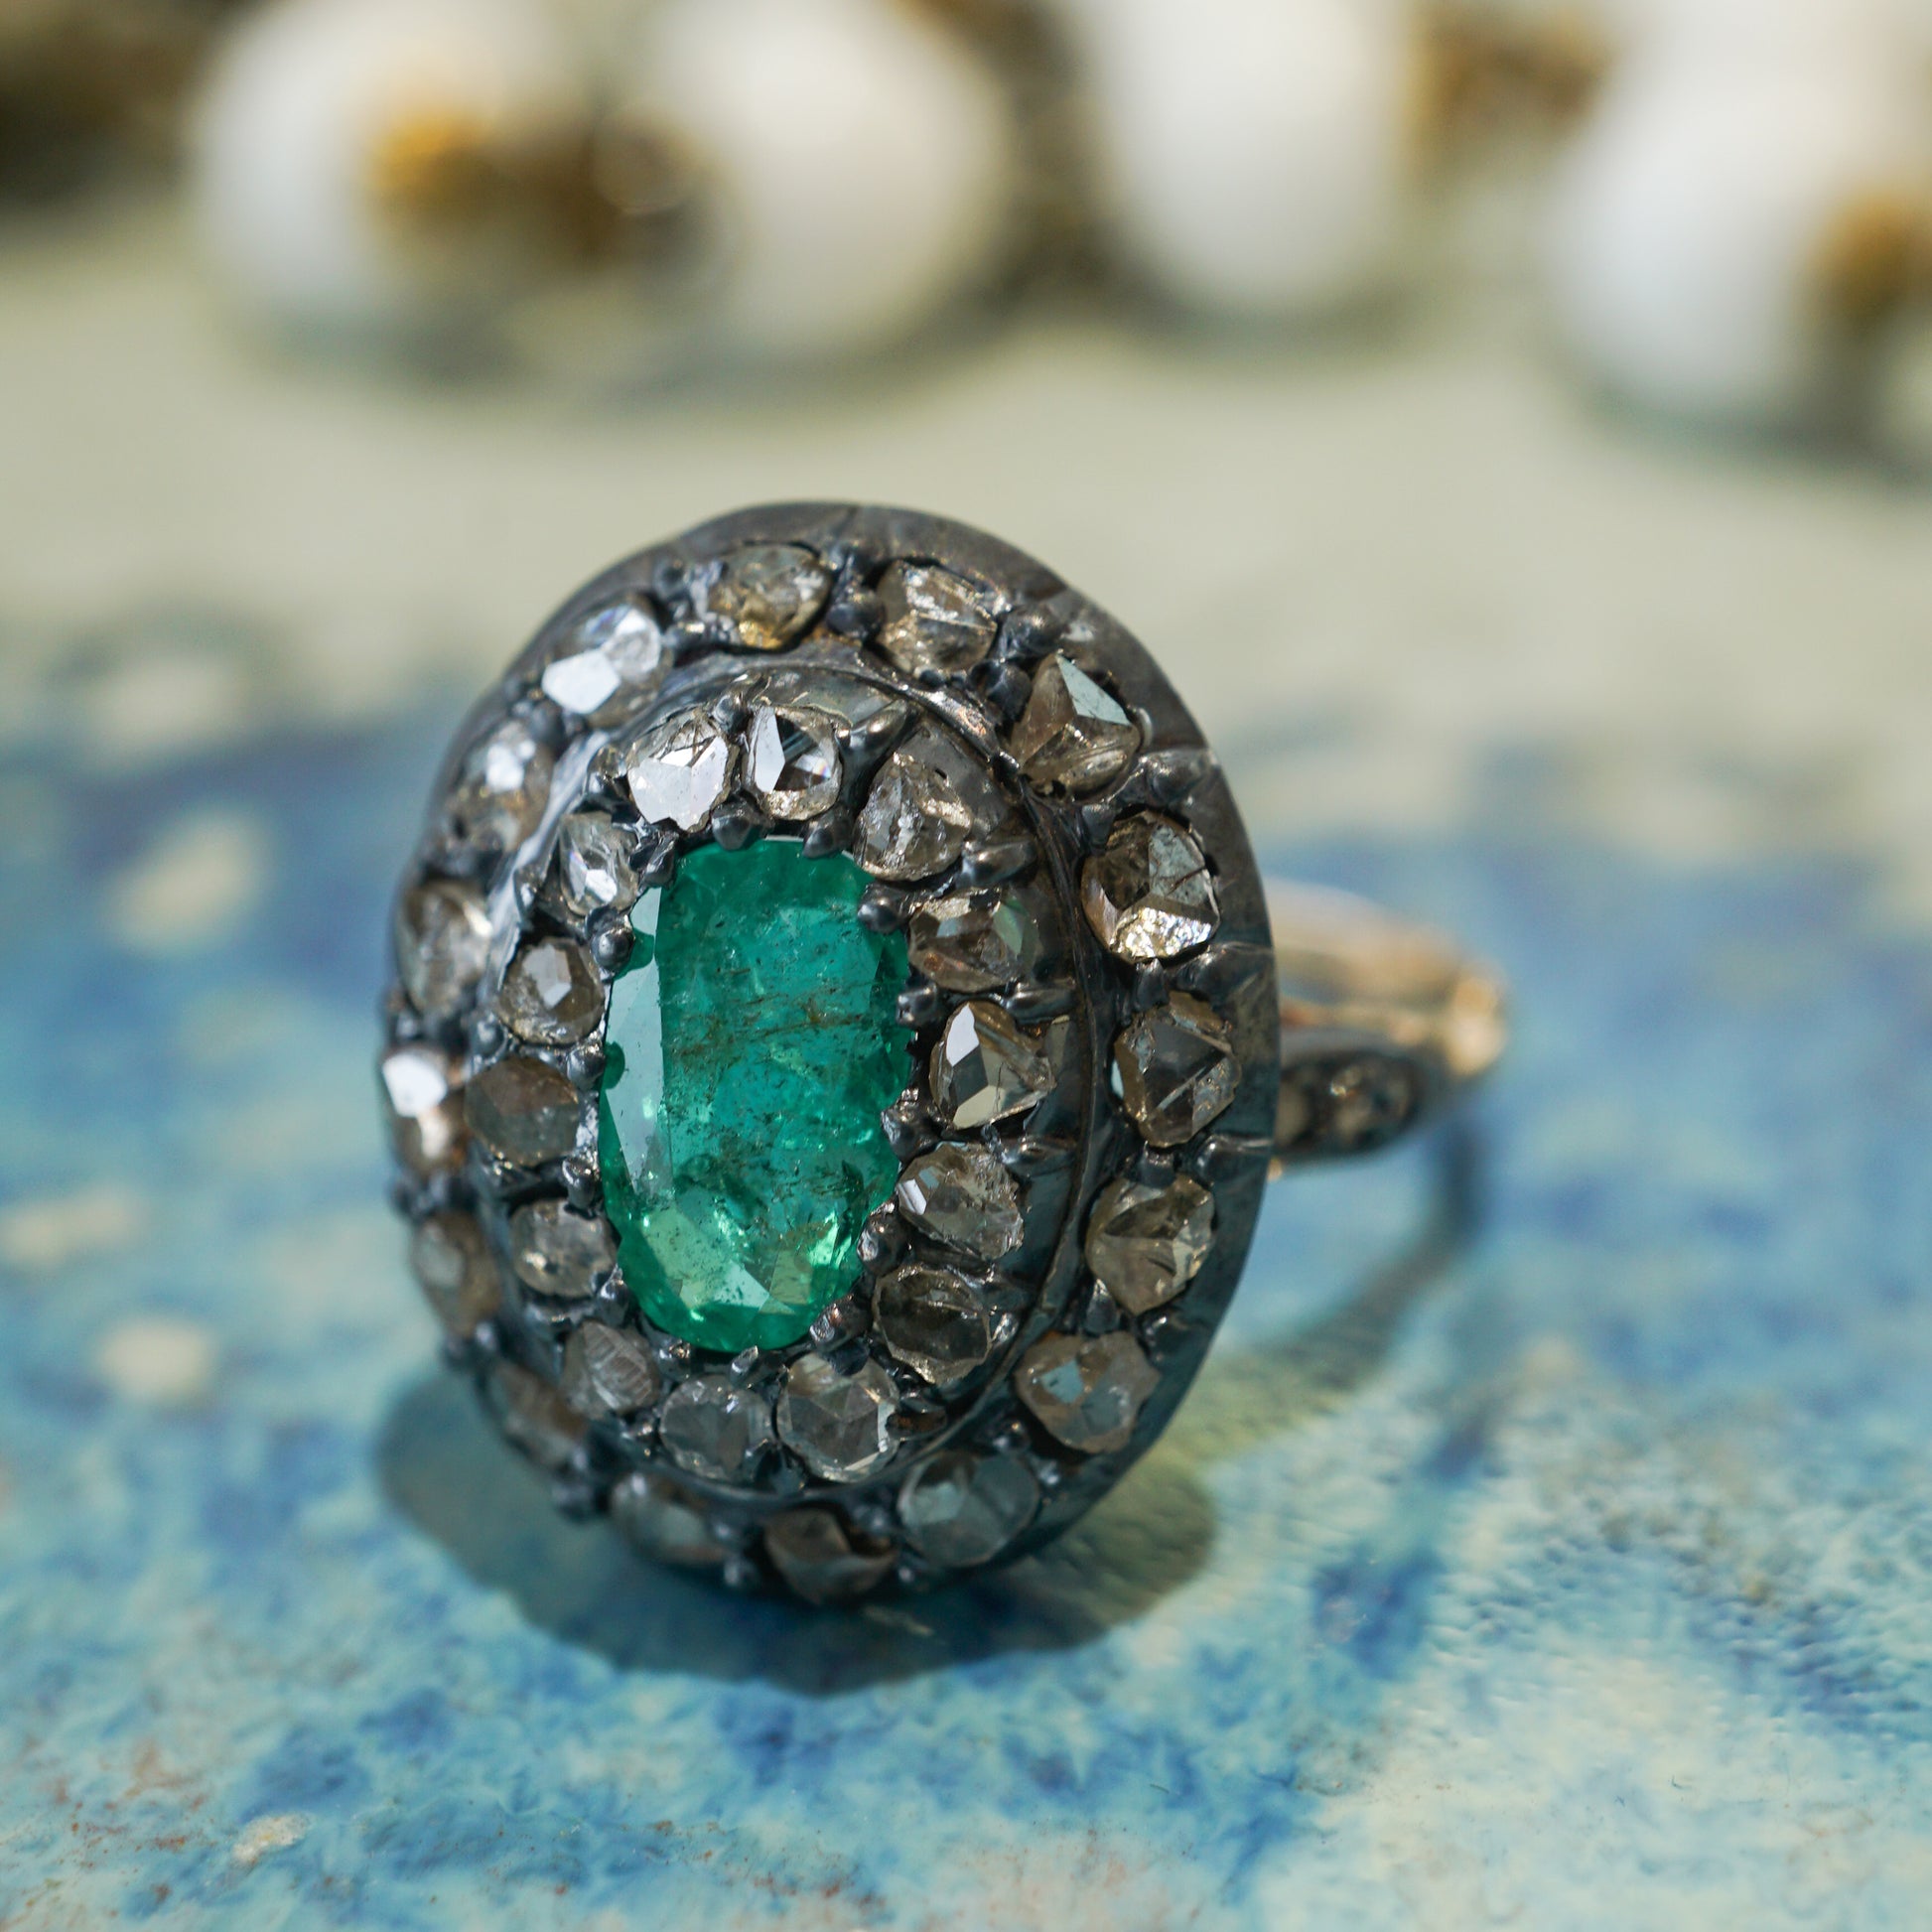 1820's Georgian Emerald Ring in Silver & 14k Yellow GoldComposition: 14 Karat Yellow Gold/Sterling Silver Ring Size: 6.5 Total Diamond Weight: .765ct Total Gram Weight: 3.8 g